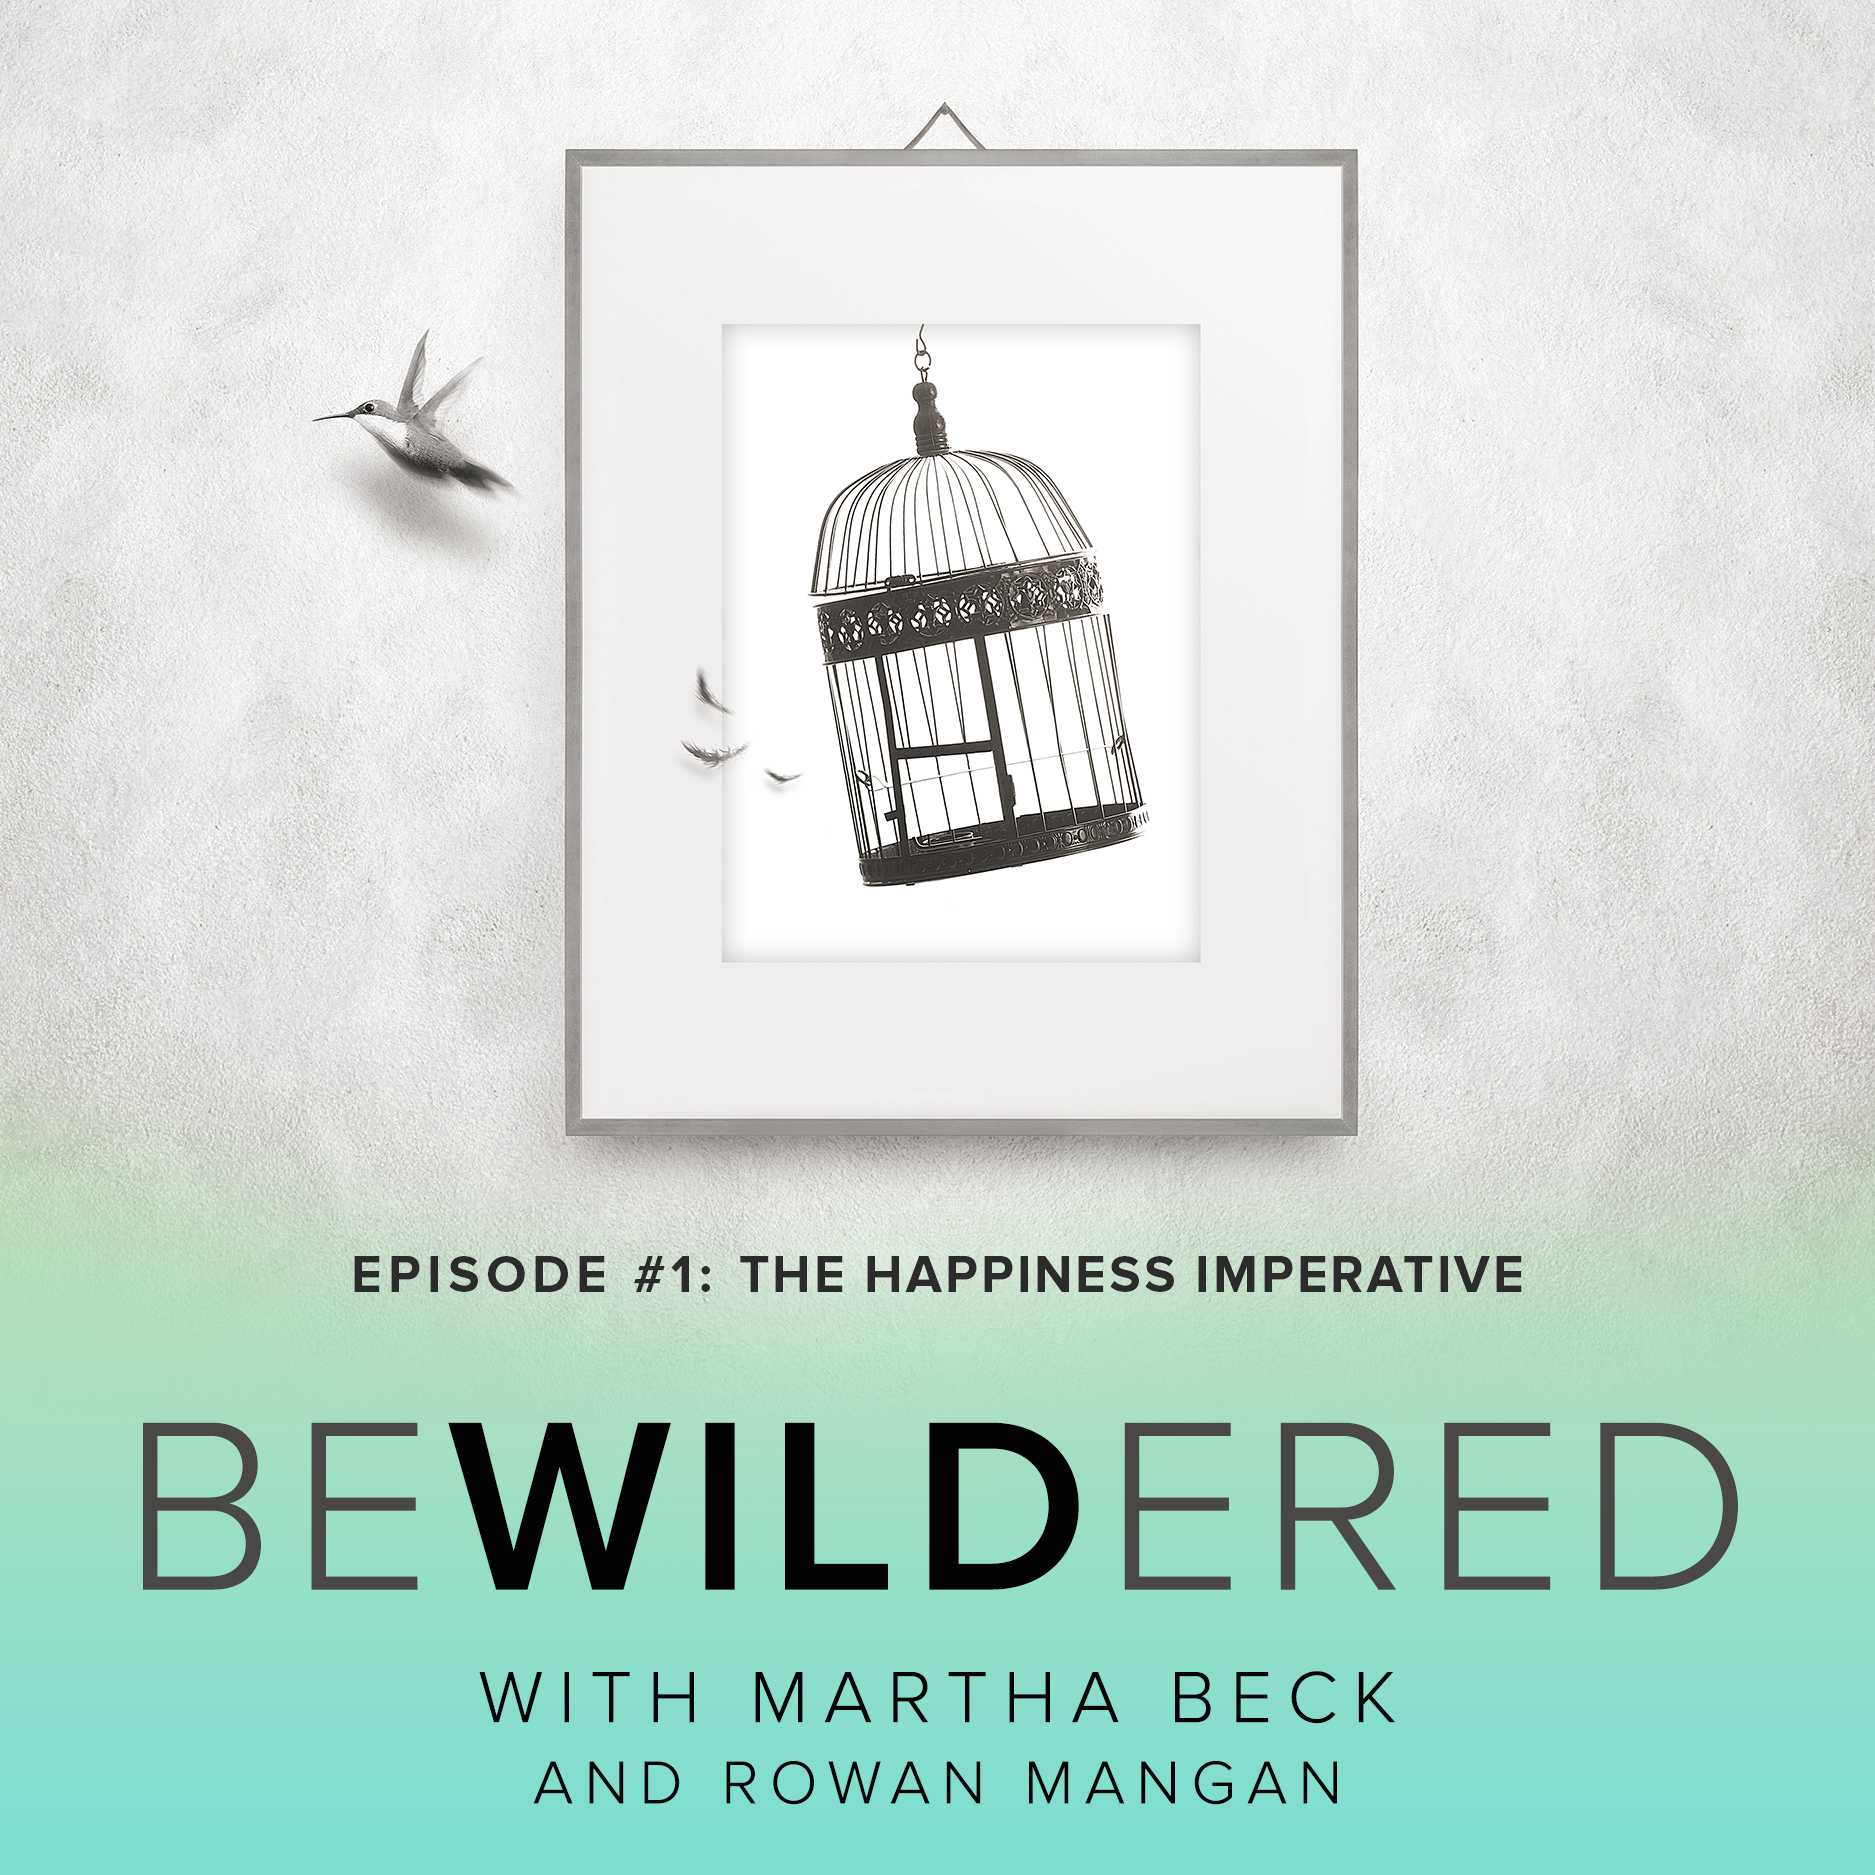 Image for Episode #1 The Happiness Imperative for the Bewildered Podcast with Martha Beck and Rowan Mangan